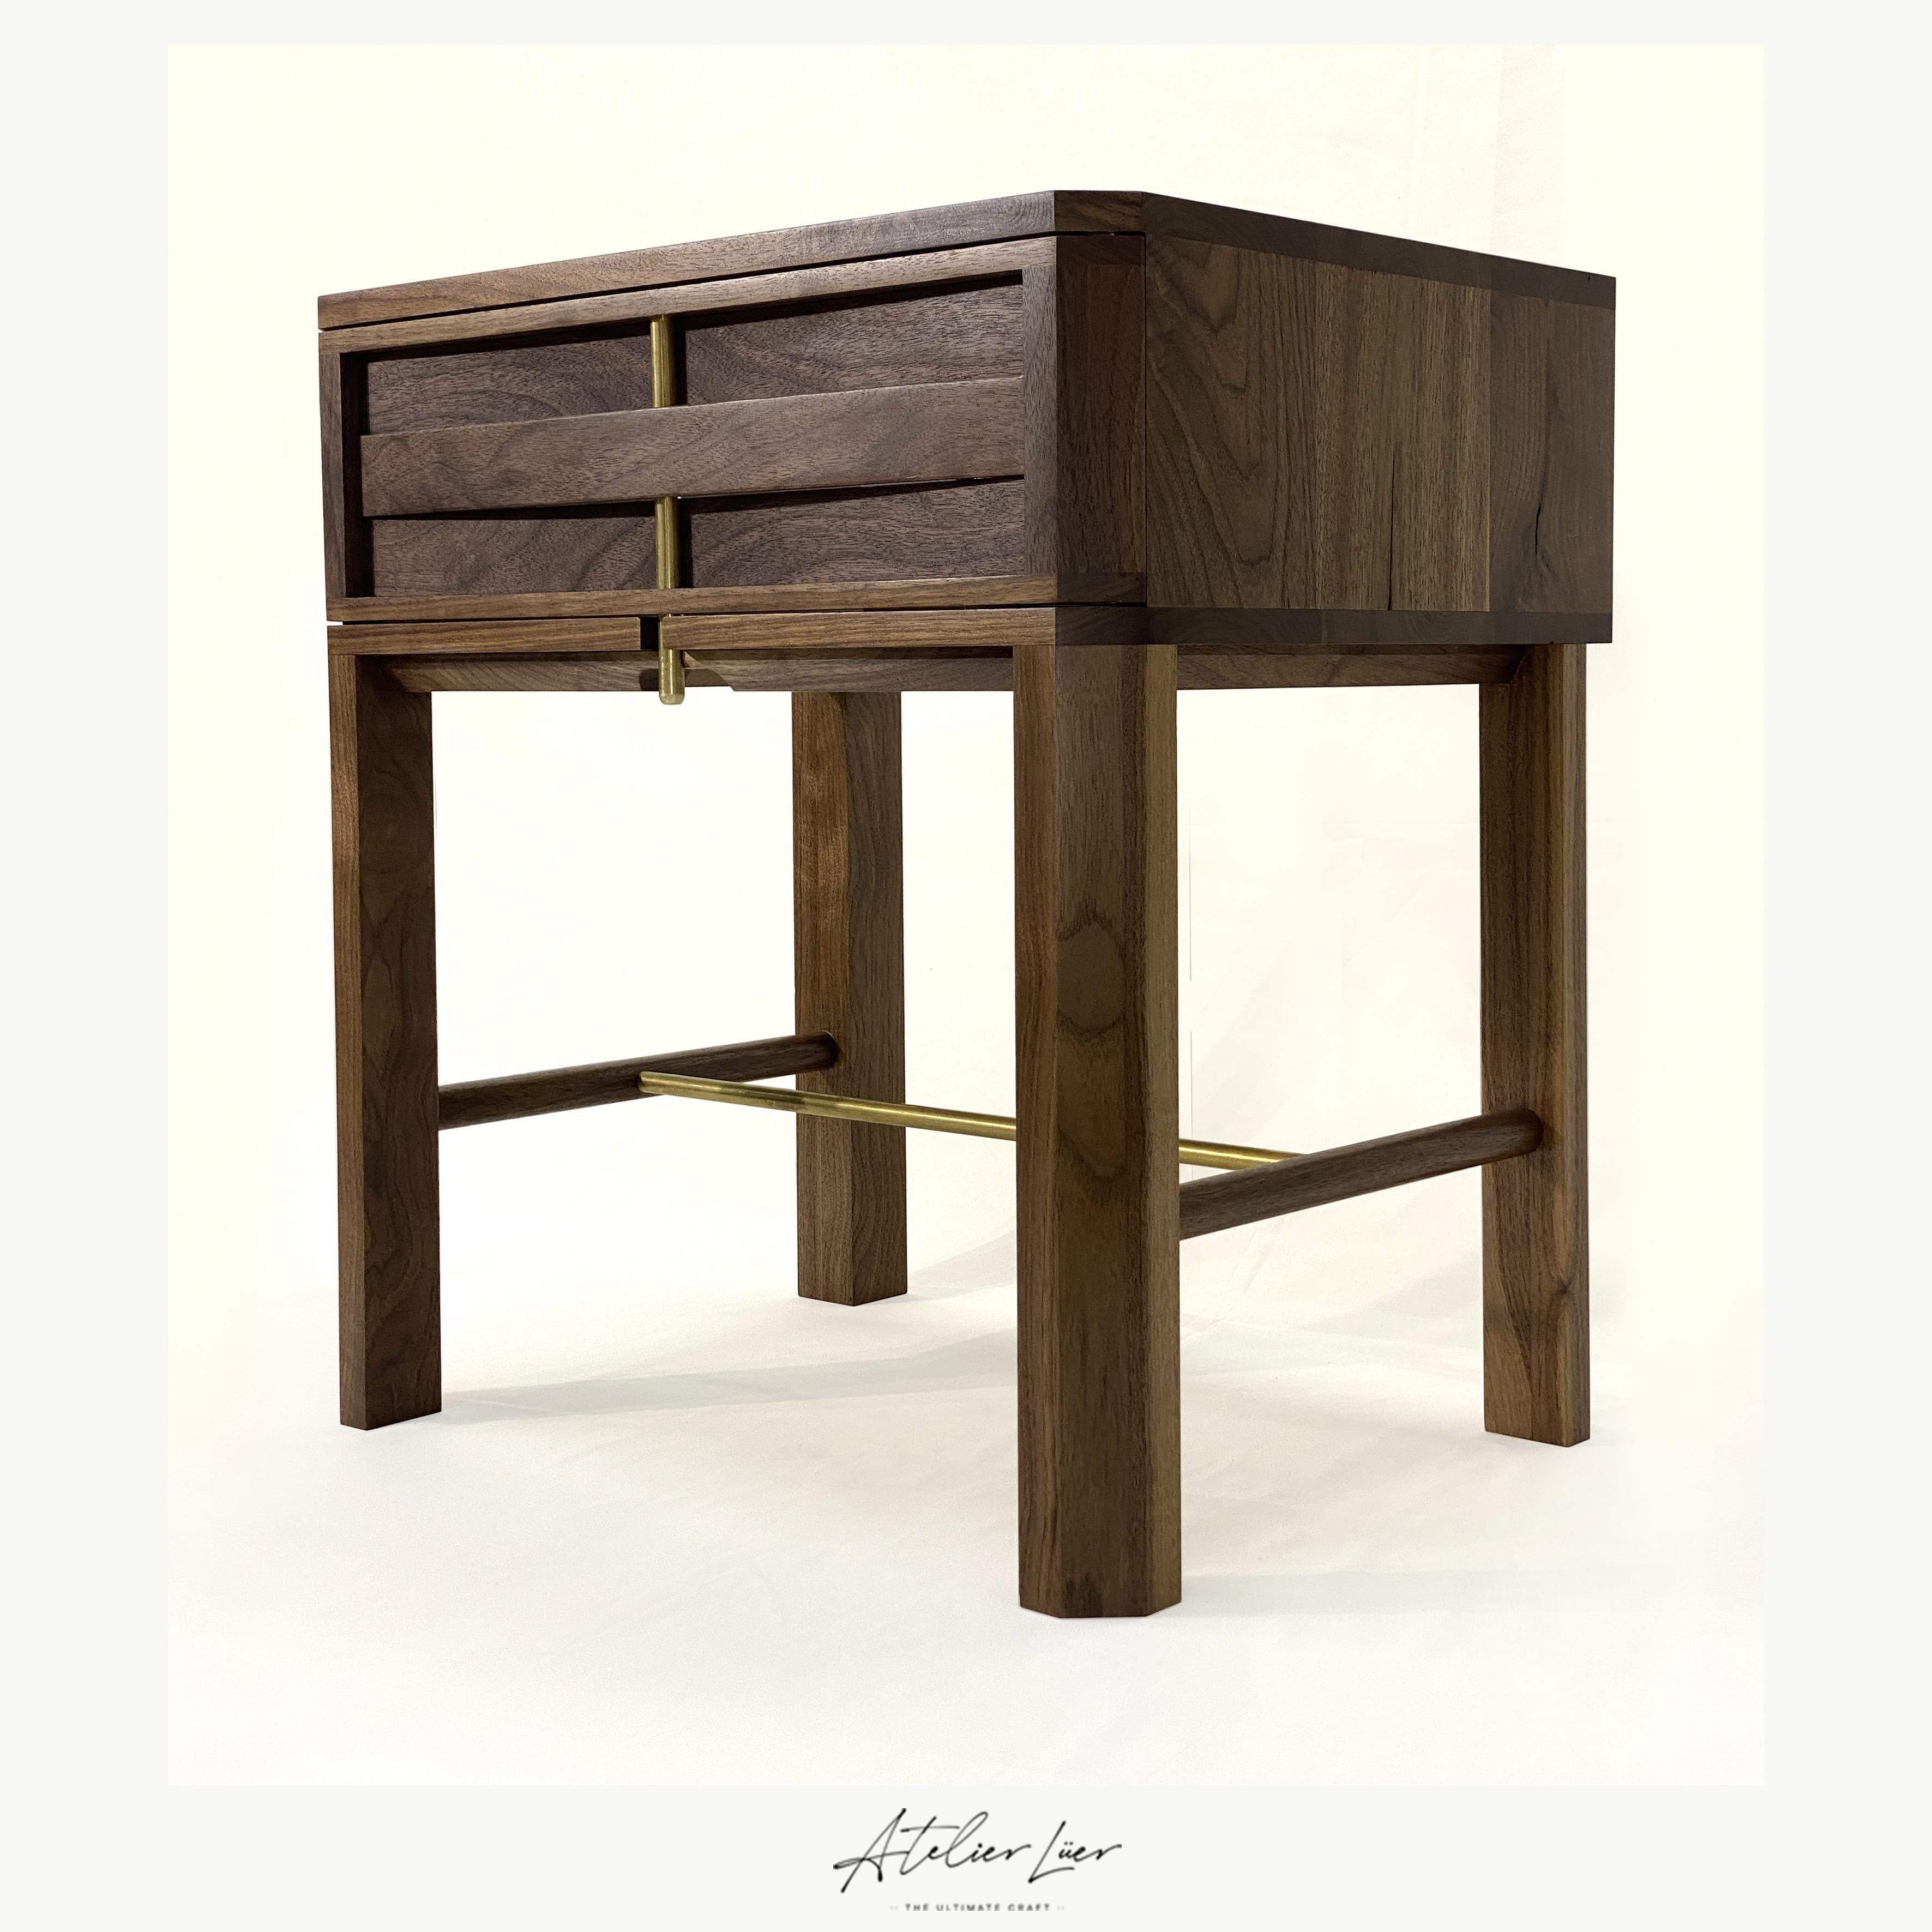 Atelier Luer Walnut Slat Front night/side/end table with drawer & brass hardware

Offered for sale is an American craftsman studio piece walnut slat front night/side/end table with a woven slat drawer and brass hardware. This piece is custom made